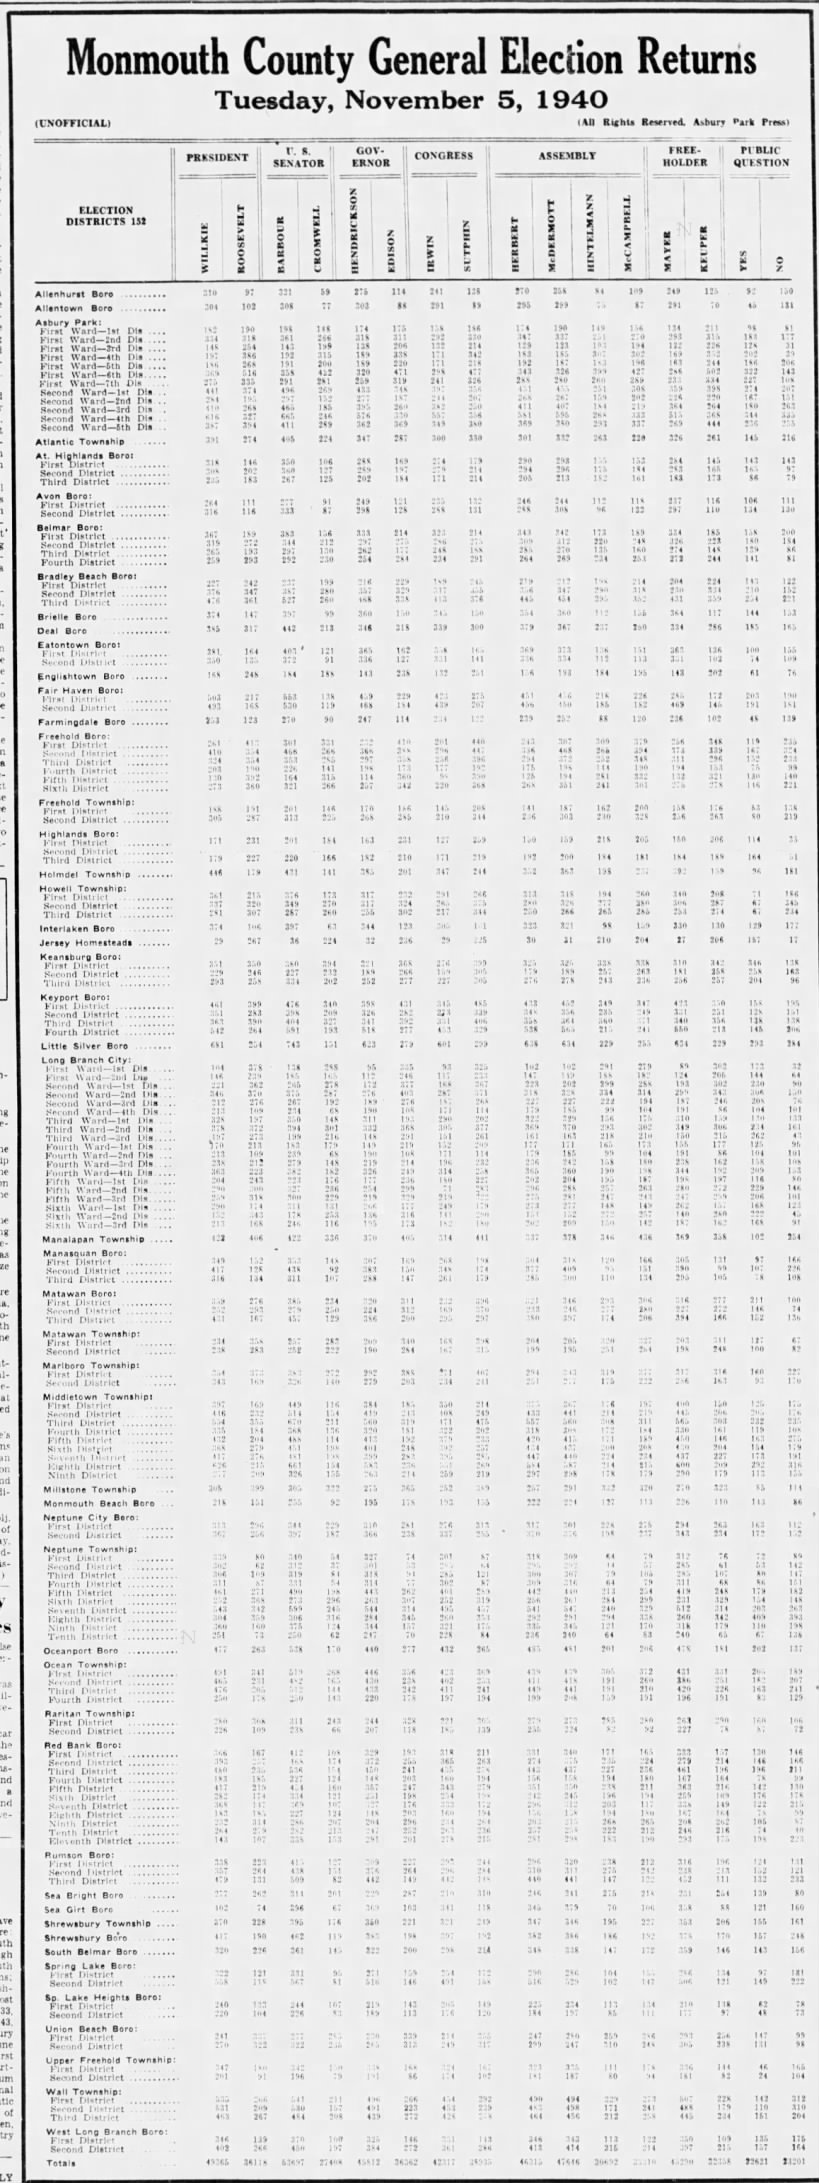 Monmouth County, NJ presidential election results, 1940